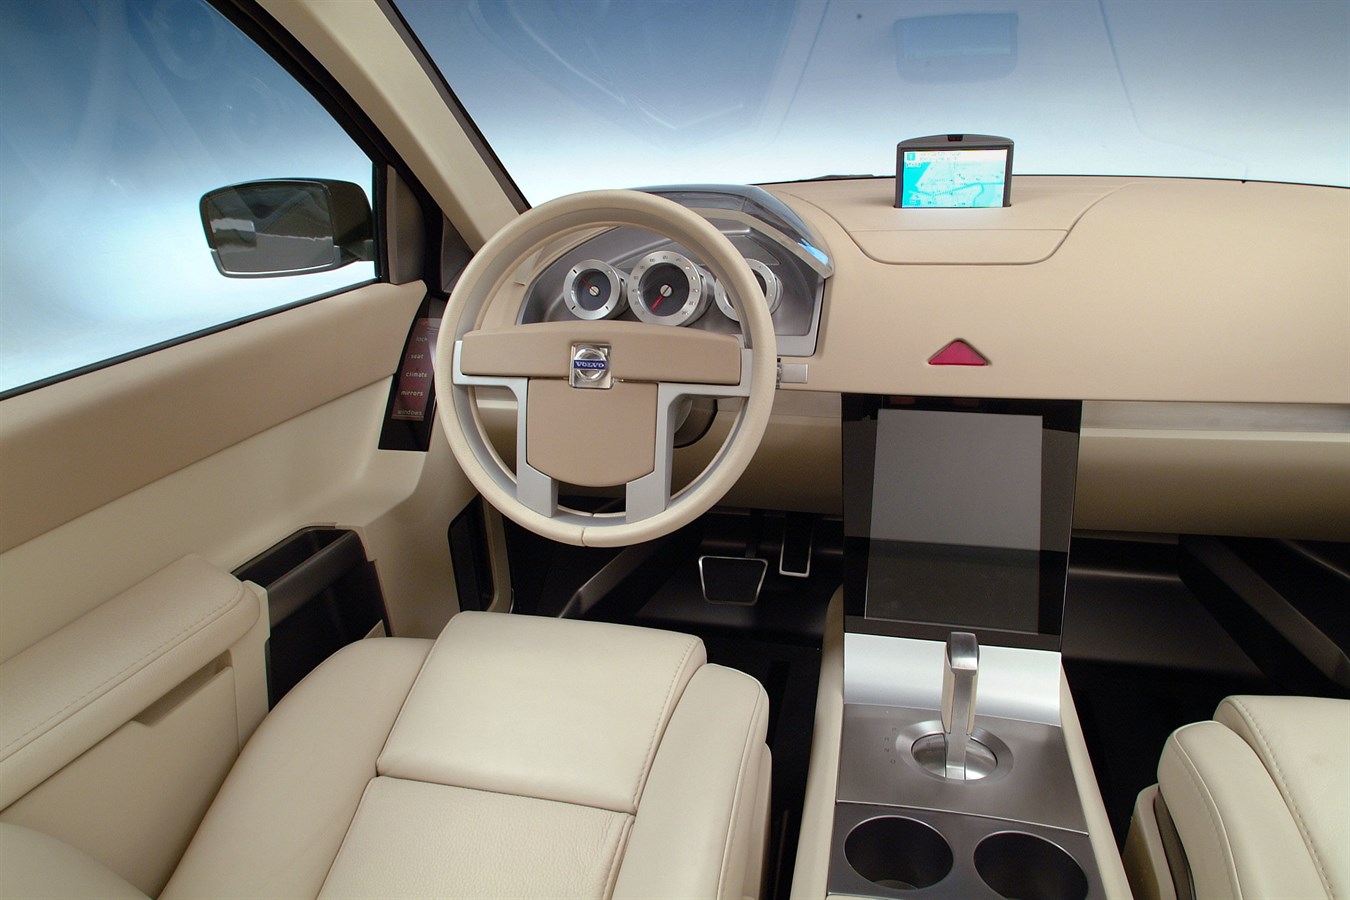 Volvo ACC Adventure Concept Car), 2001, Interior, The ACC was first shown at the Geneva Motor Show about two years before Volvo SUV, the XC90, came onto the market, No secret was made of the fact, that this was a taste of things to come